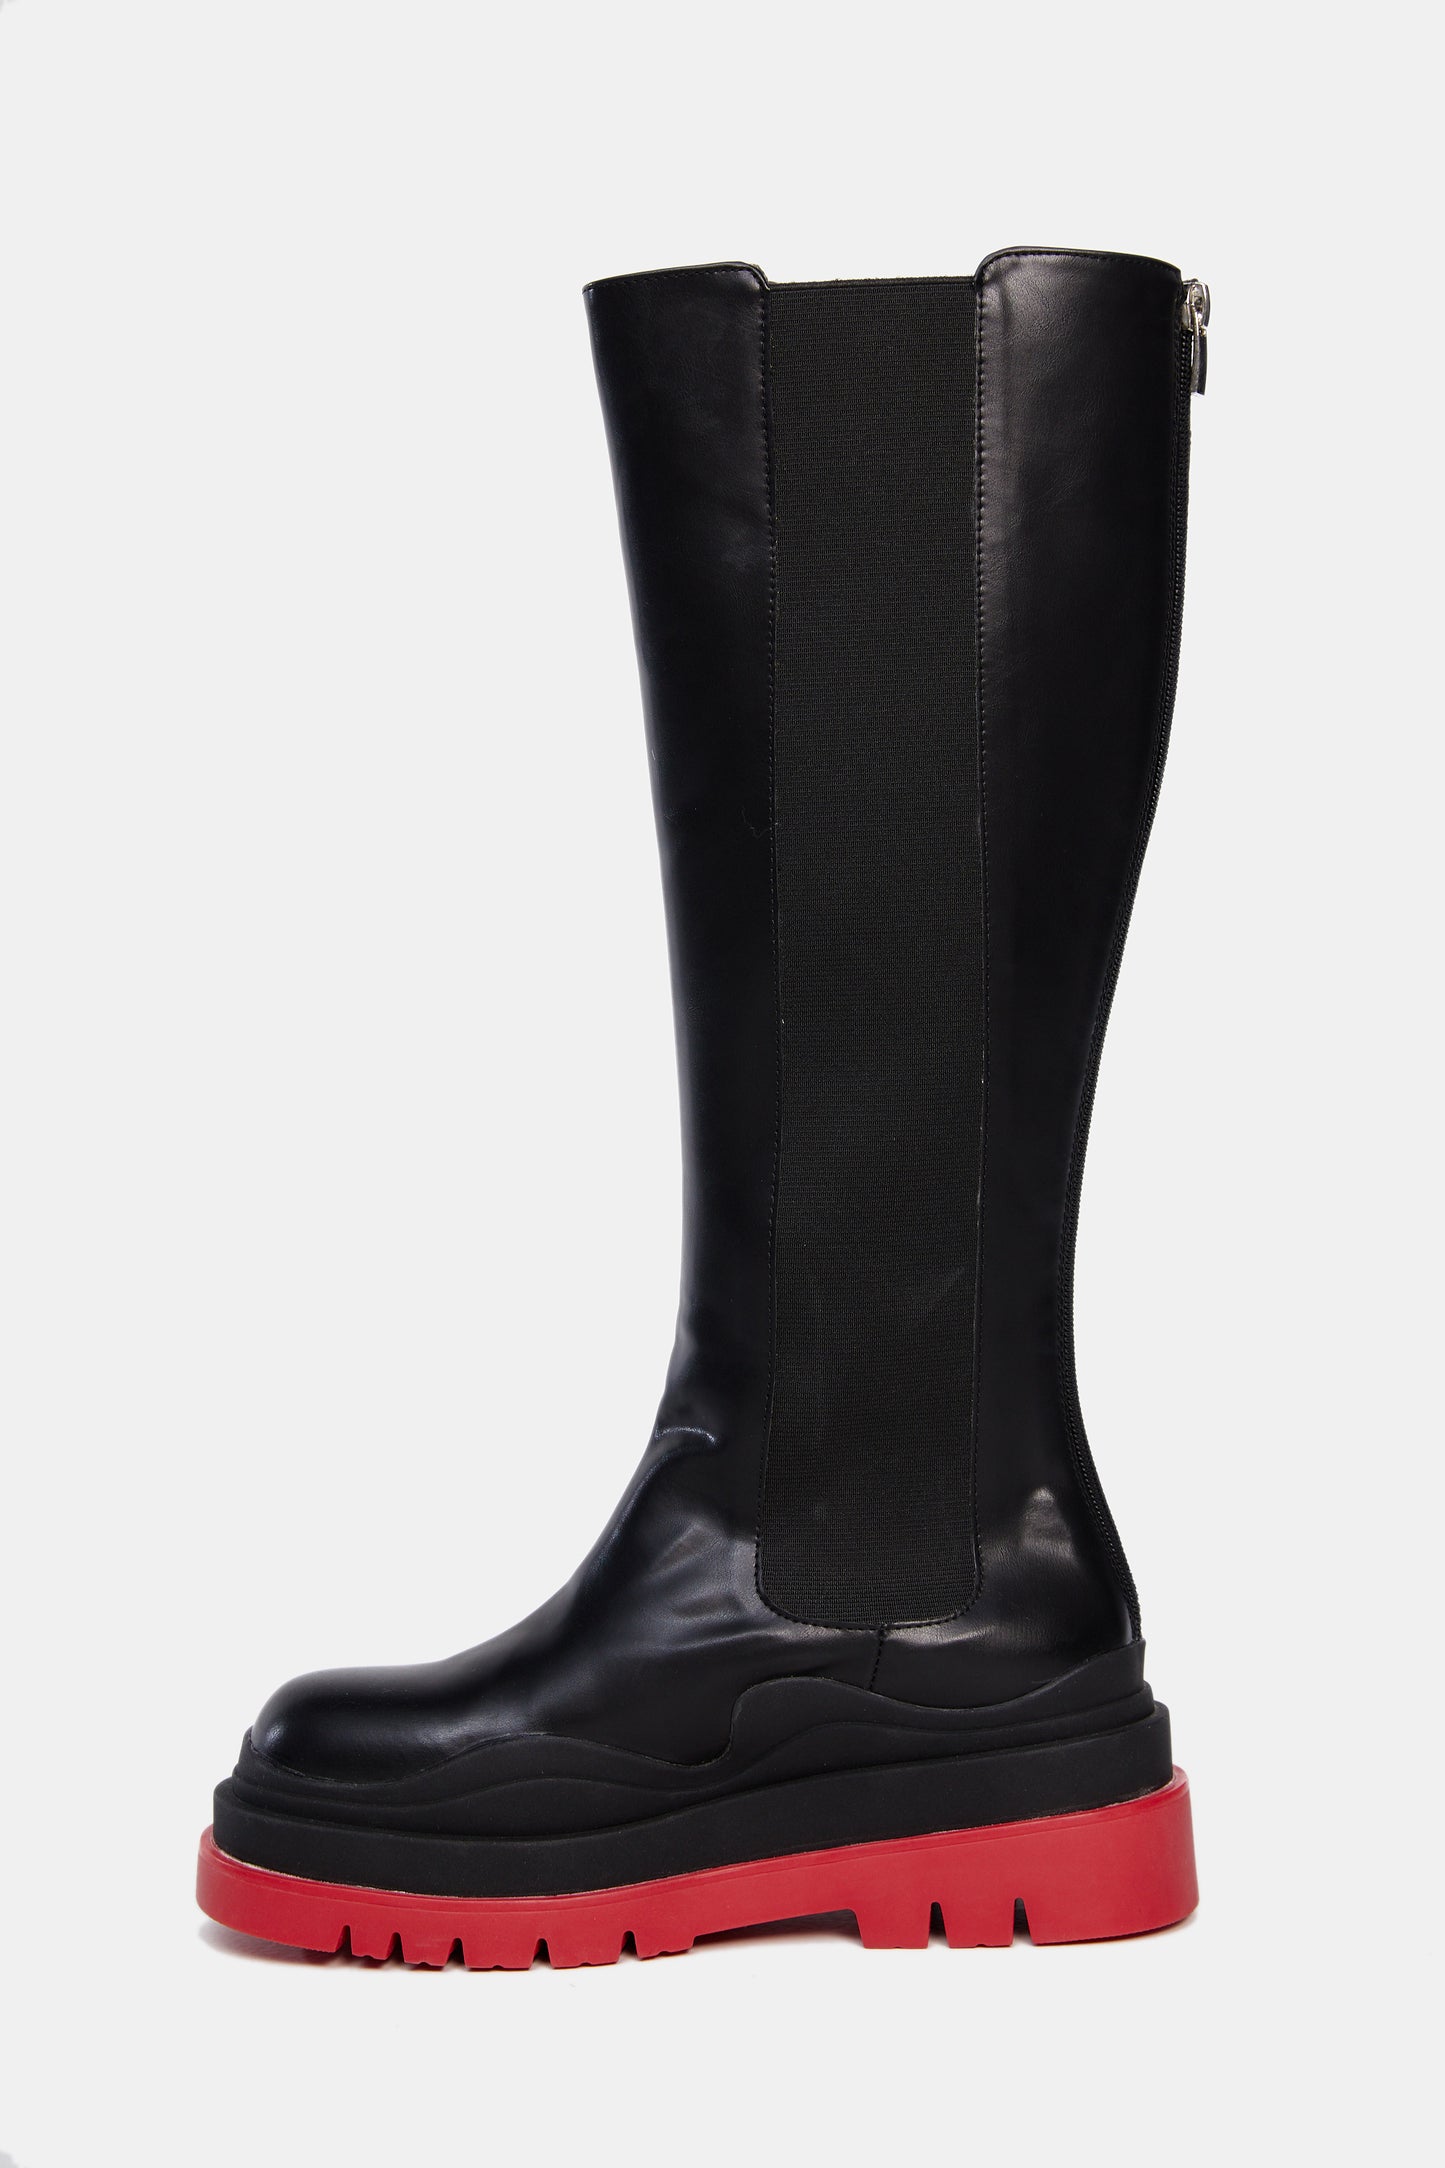 Lug Sole High Knee Boots, Red & Black